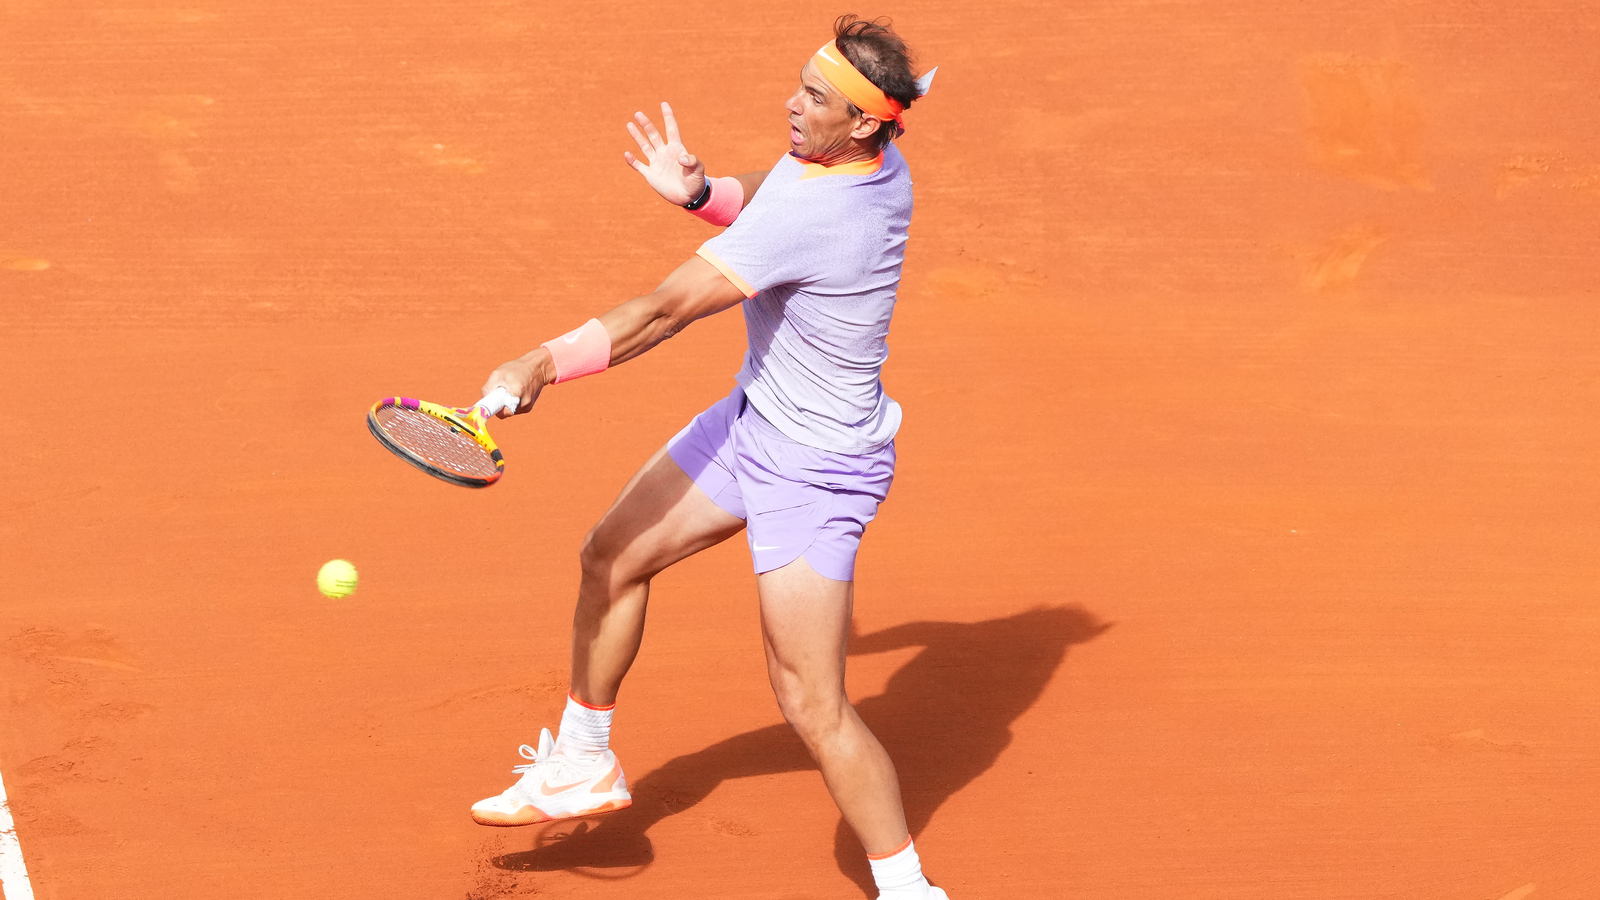 'Give everything and die for it,' Comeback king Rafael Nadal is not giving up anytime soon despite suffering loss against Alex de Minaur in Barcelona